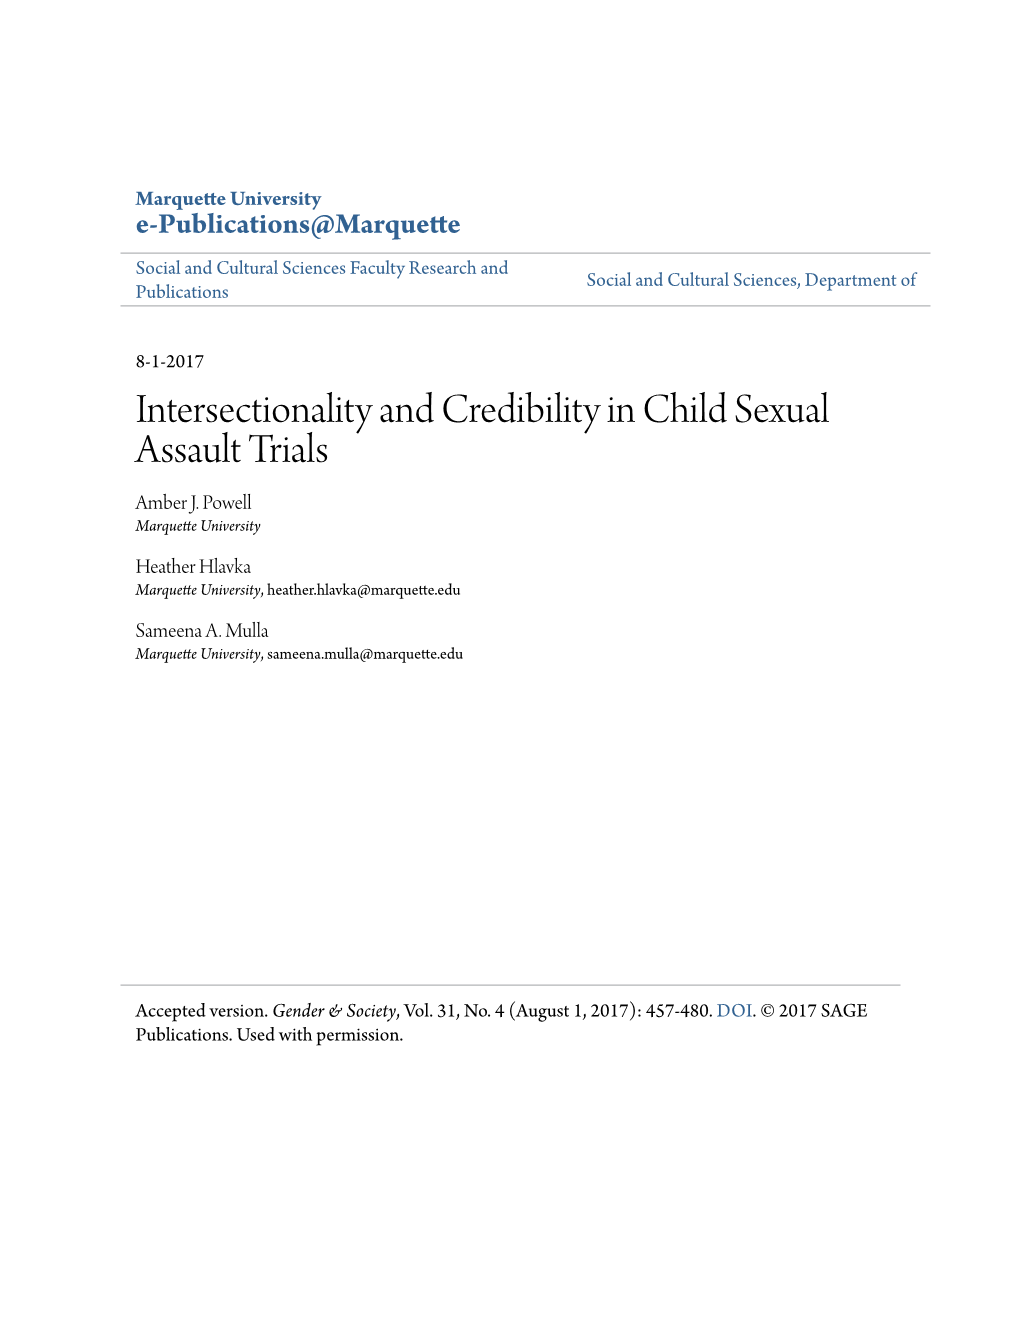 Intersectionality and Credibility in Child Sexual Assault Trials Amber J